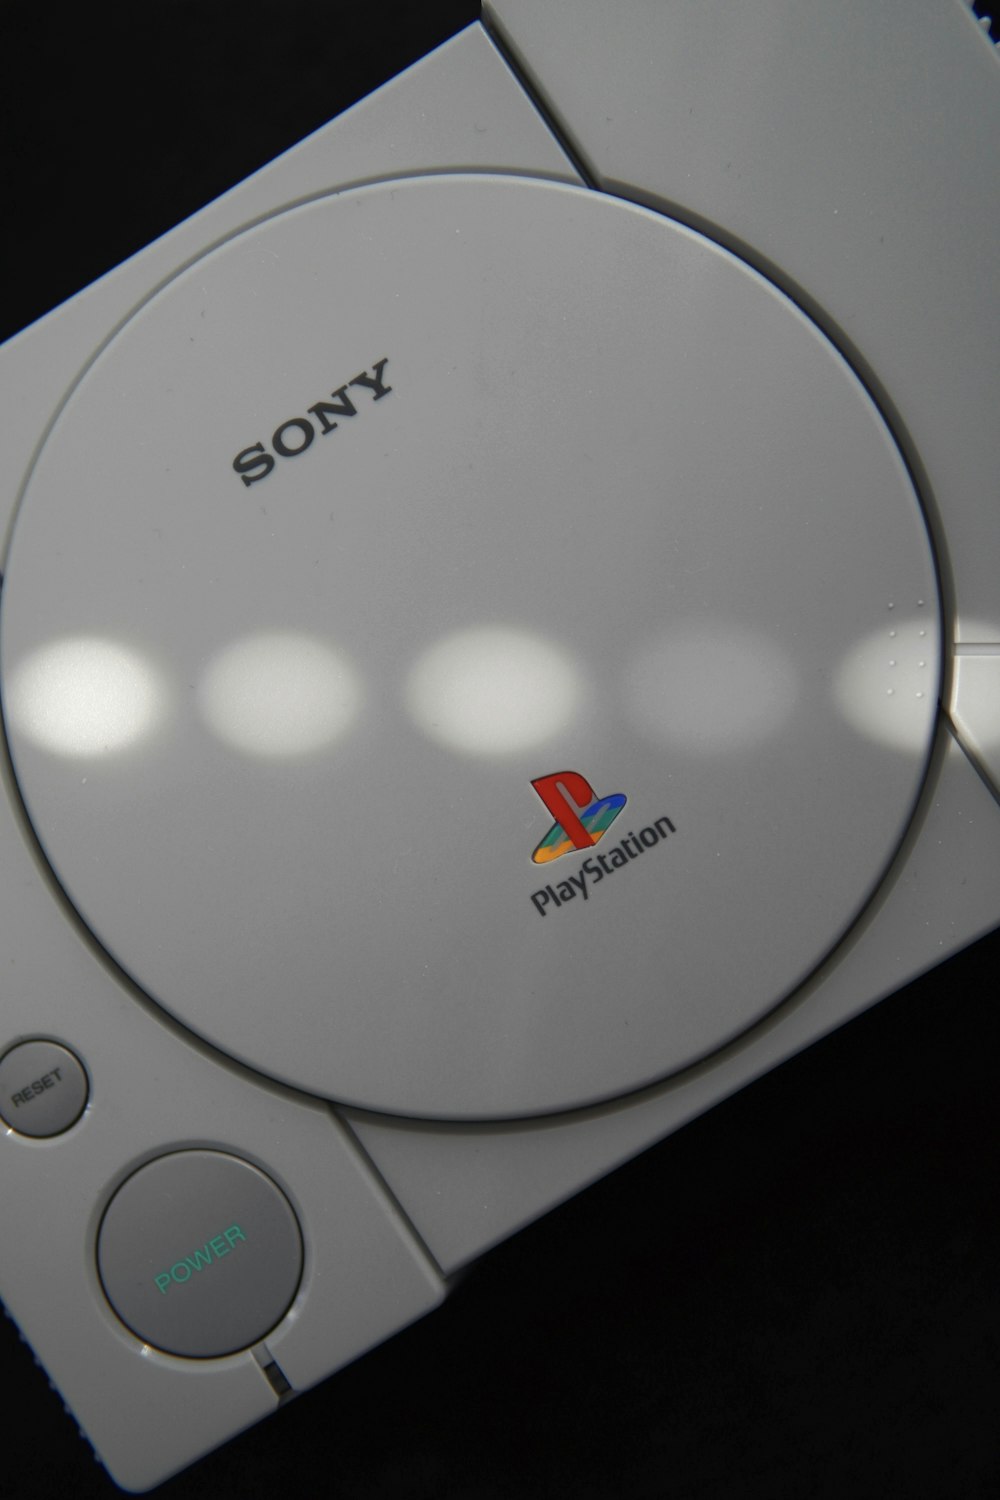 a video game console with a sony logo on it